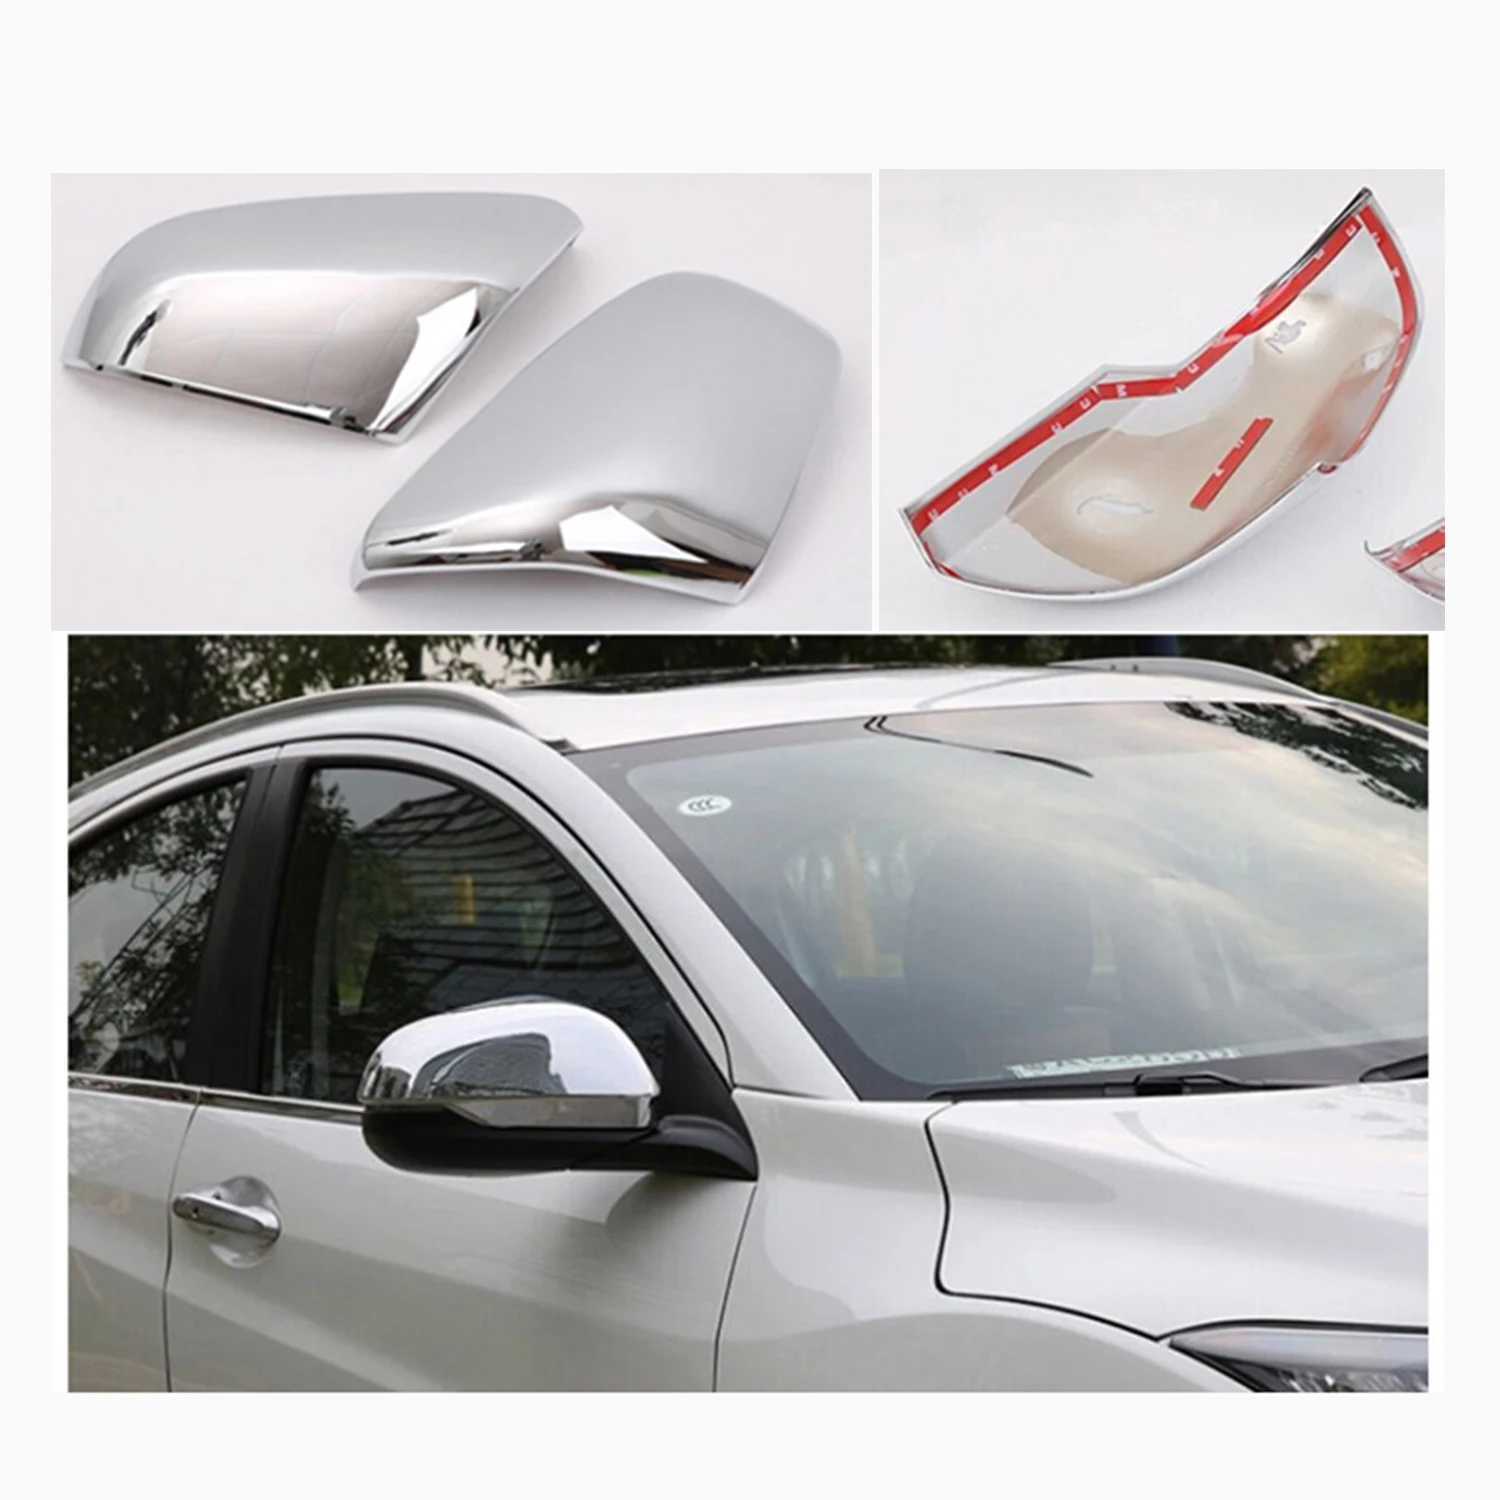 

Car Chrome Rearview Accessories Plated For Honda HR-V HRV Vezel 2014 2015 2016 2017 2018 Side Door Mirror Cover Trim Paste Style